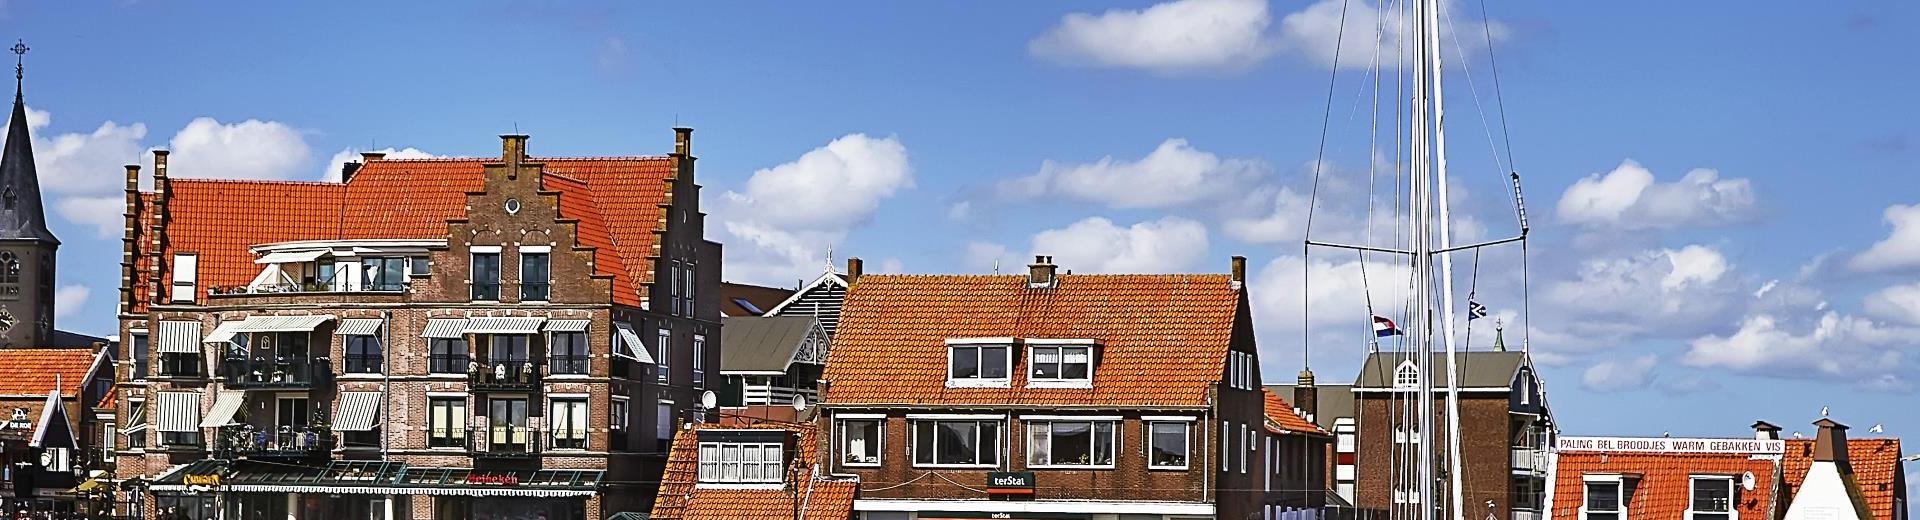 Find the perfect vacation home in Friesland - Casamundo